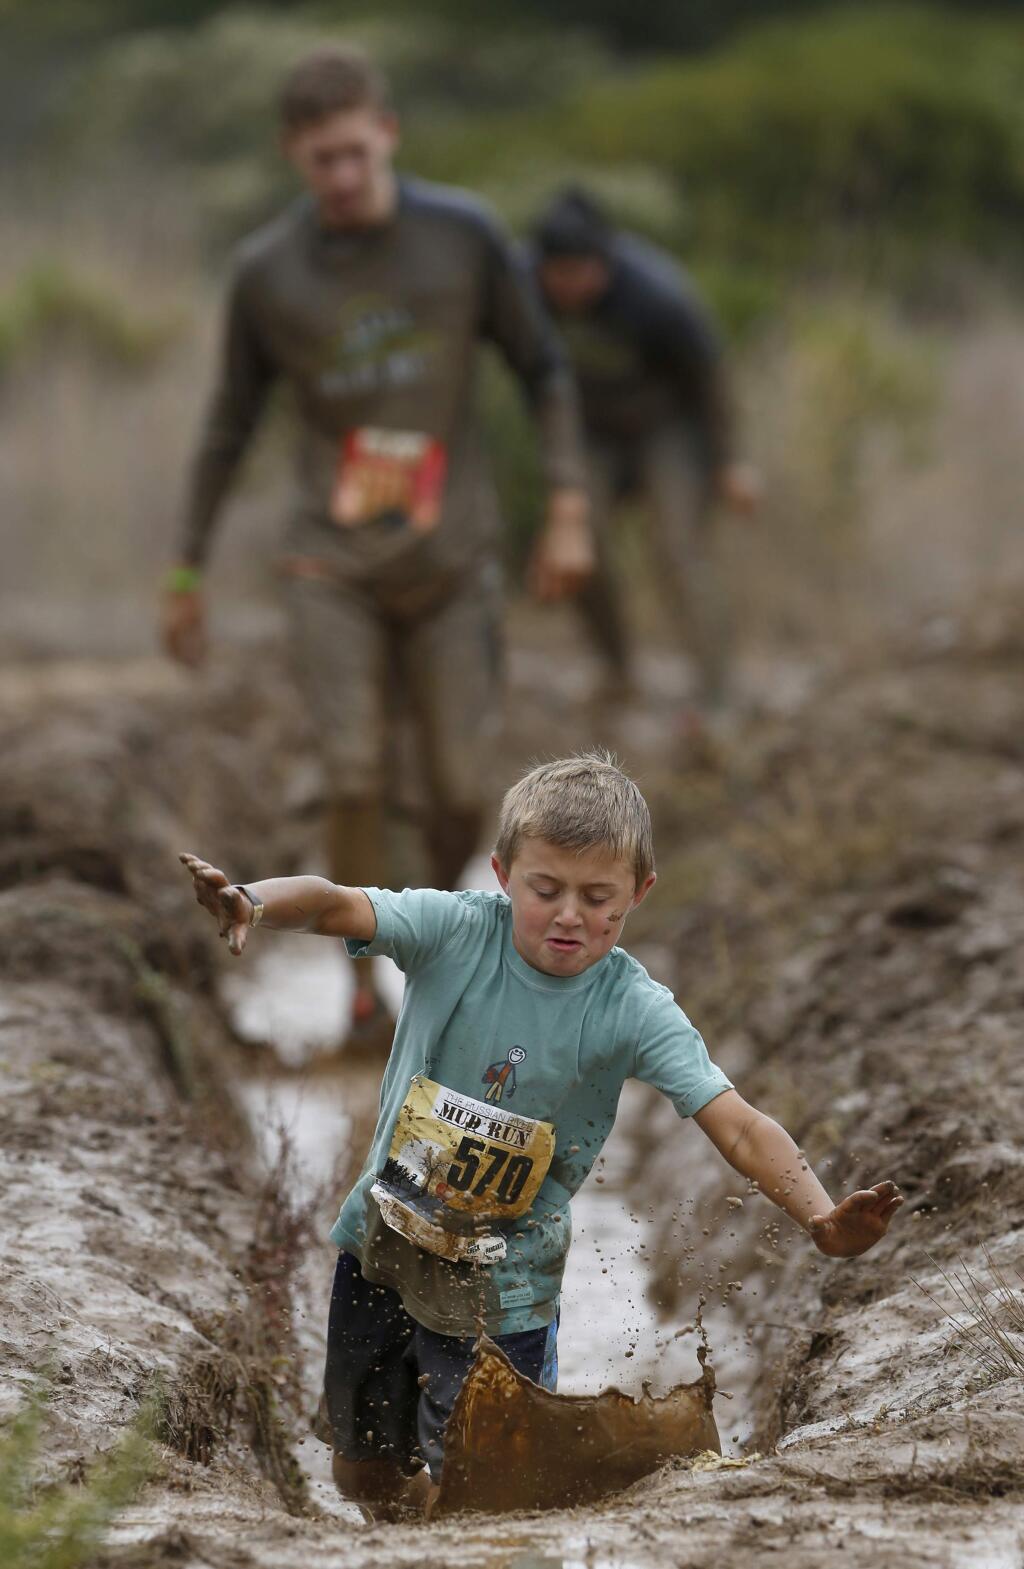 Vincent Pecoraro, 8, falls into a mud hole during the Russian River Mud Run at Rio Lindo Adventist Academy on Sunday, October 27, 2013 in Healdsburg, California. (BETH SCHLANKER/ The Press Democrat)